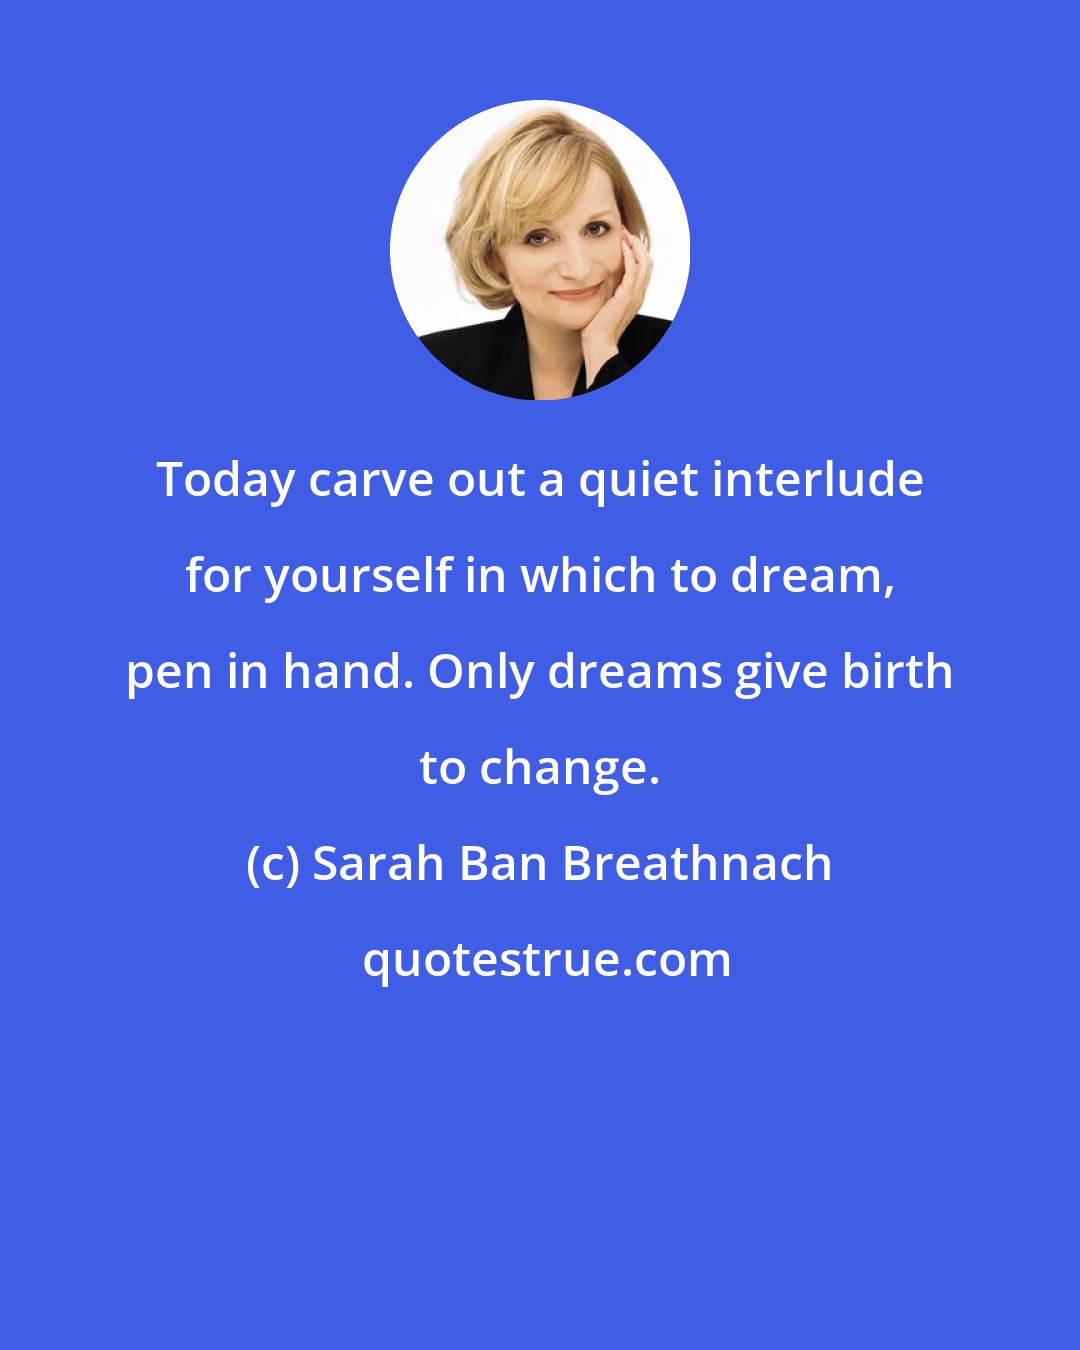 Sarah Ban Breathnach: Today carve out a quiet interlude for yourself in which to dream, pen in hand. Only dreams give birth to change.